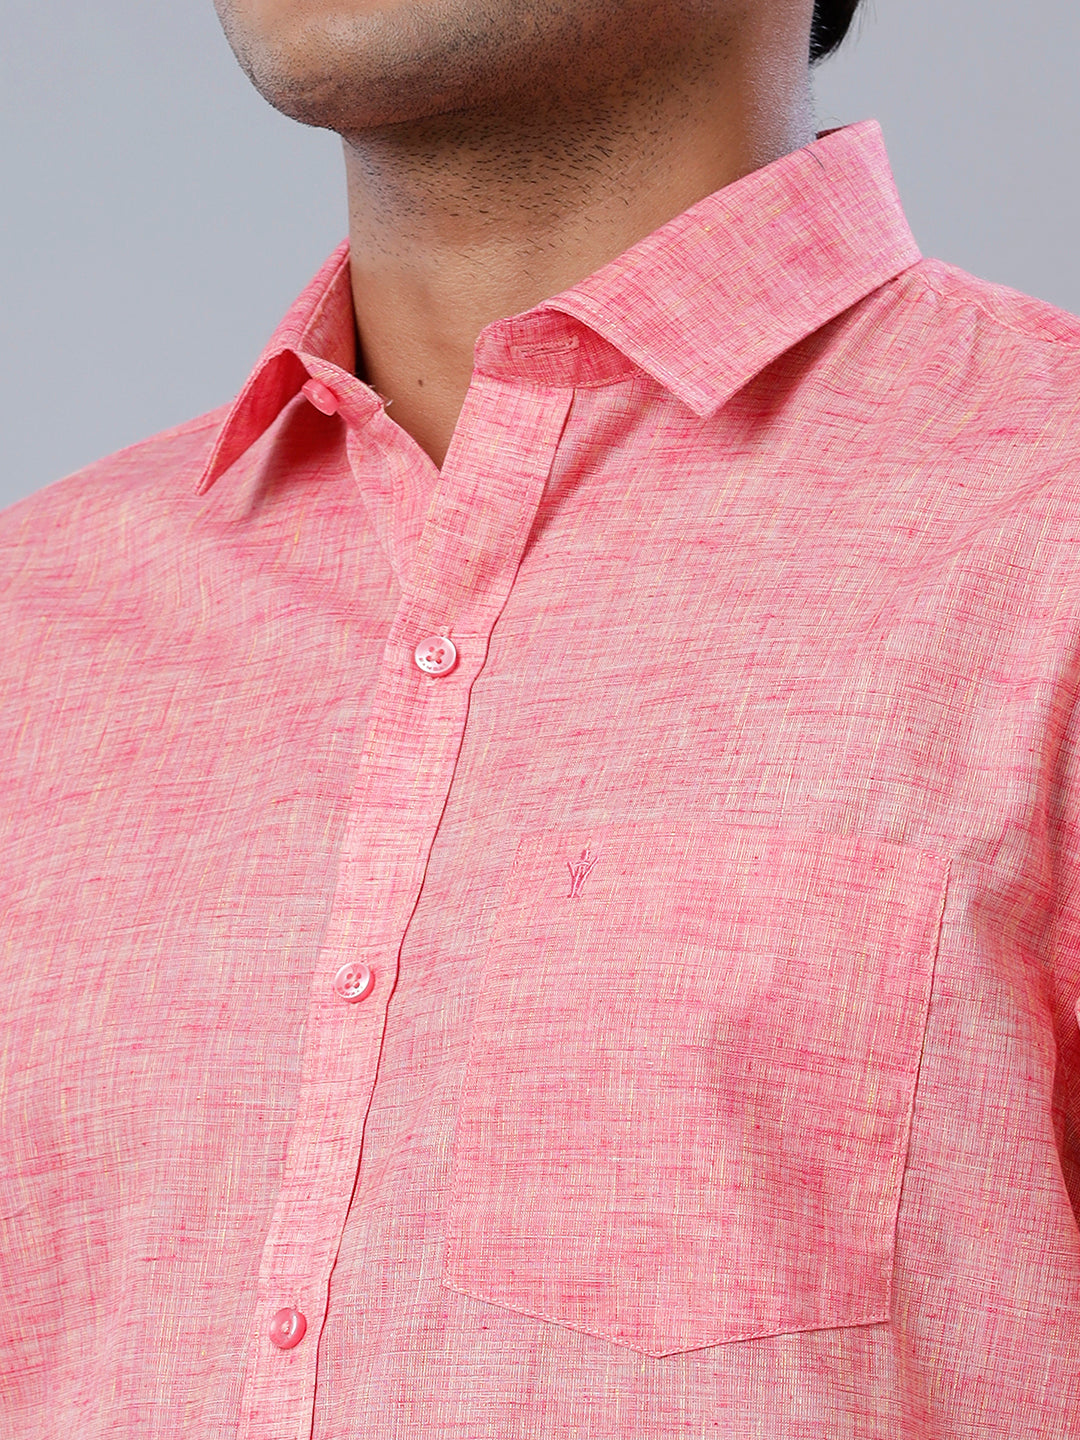 Mens Formal Shirt Full Sleeves Pink T39 TO1-Zoom view